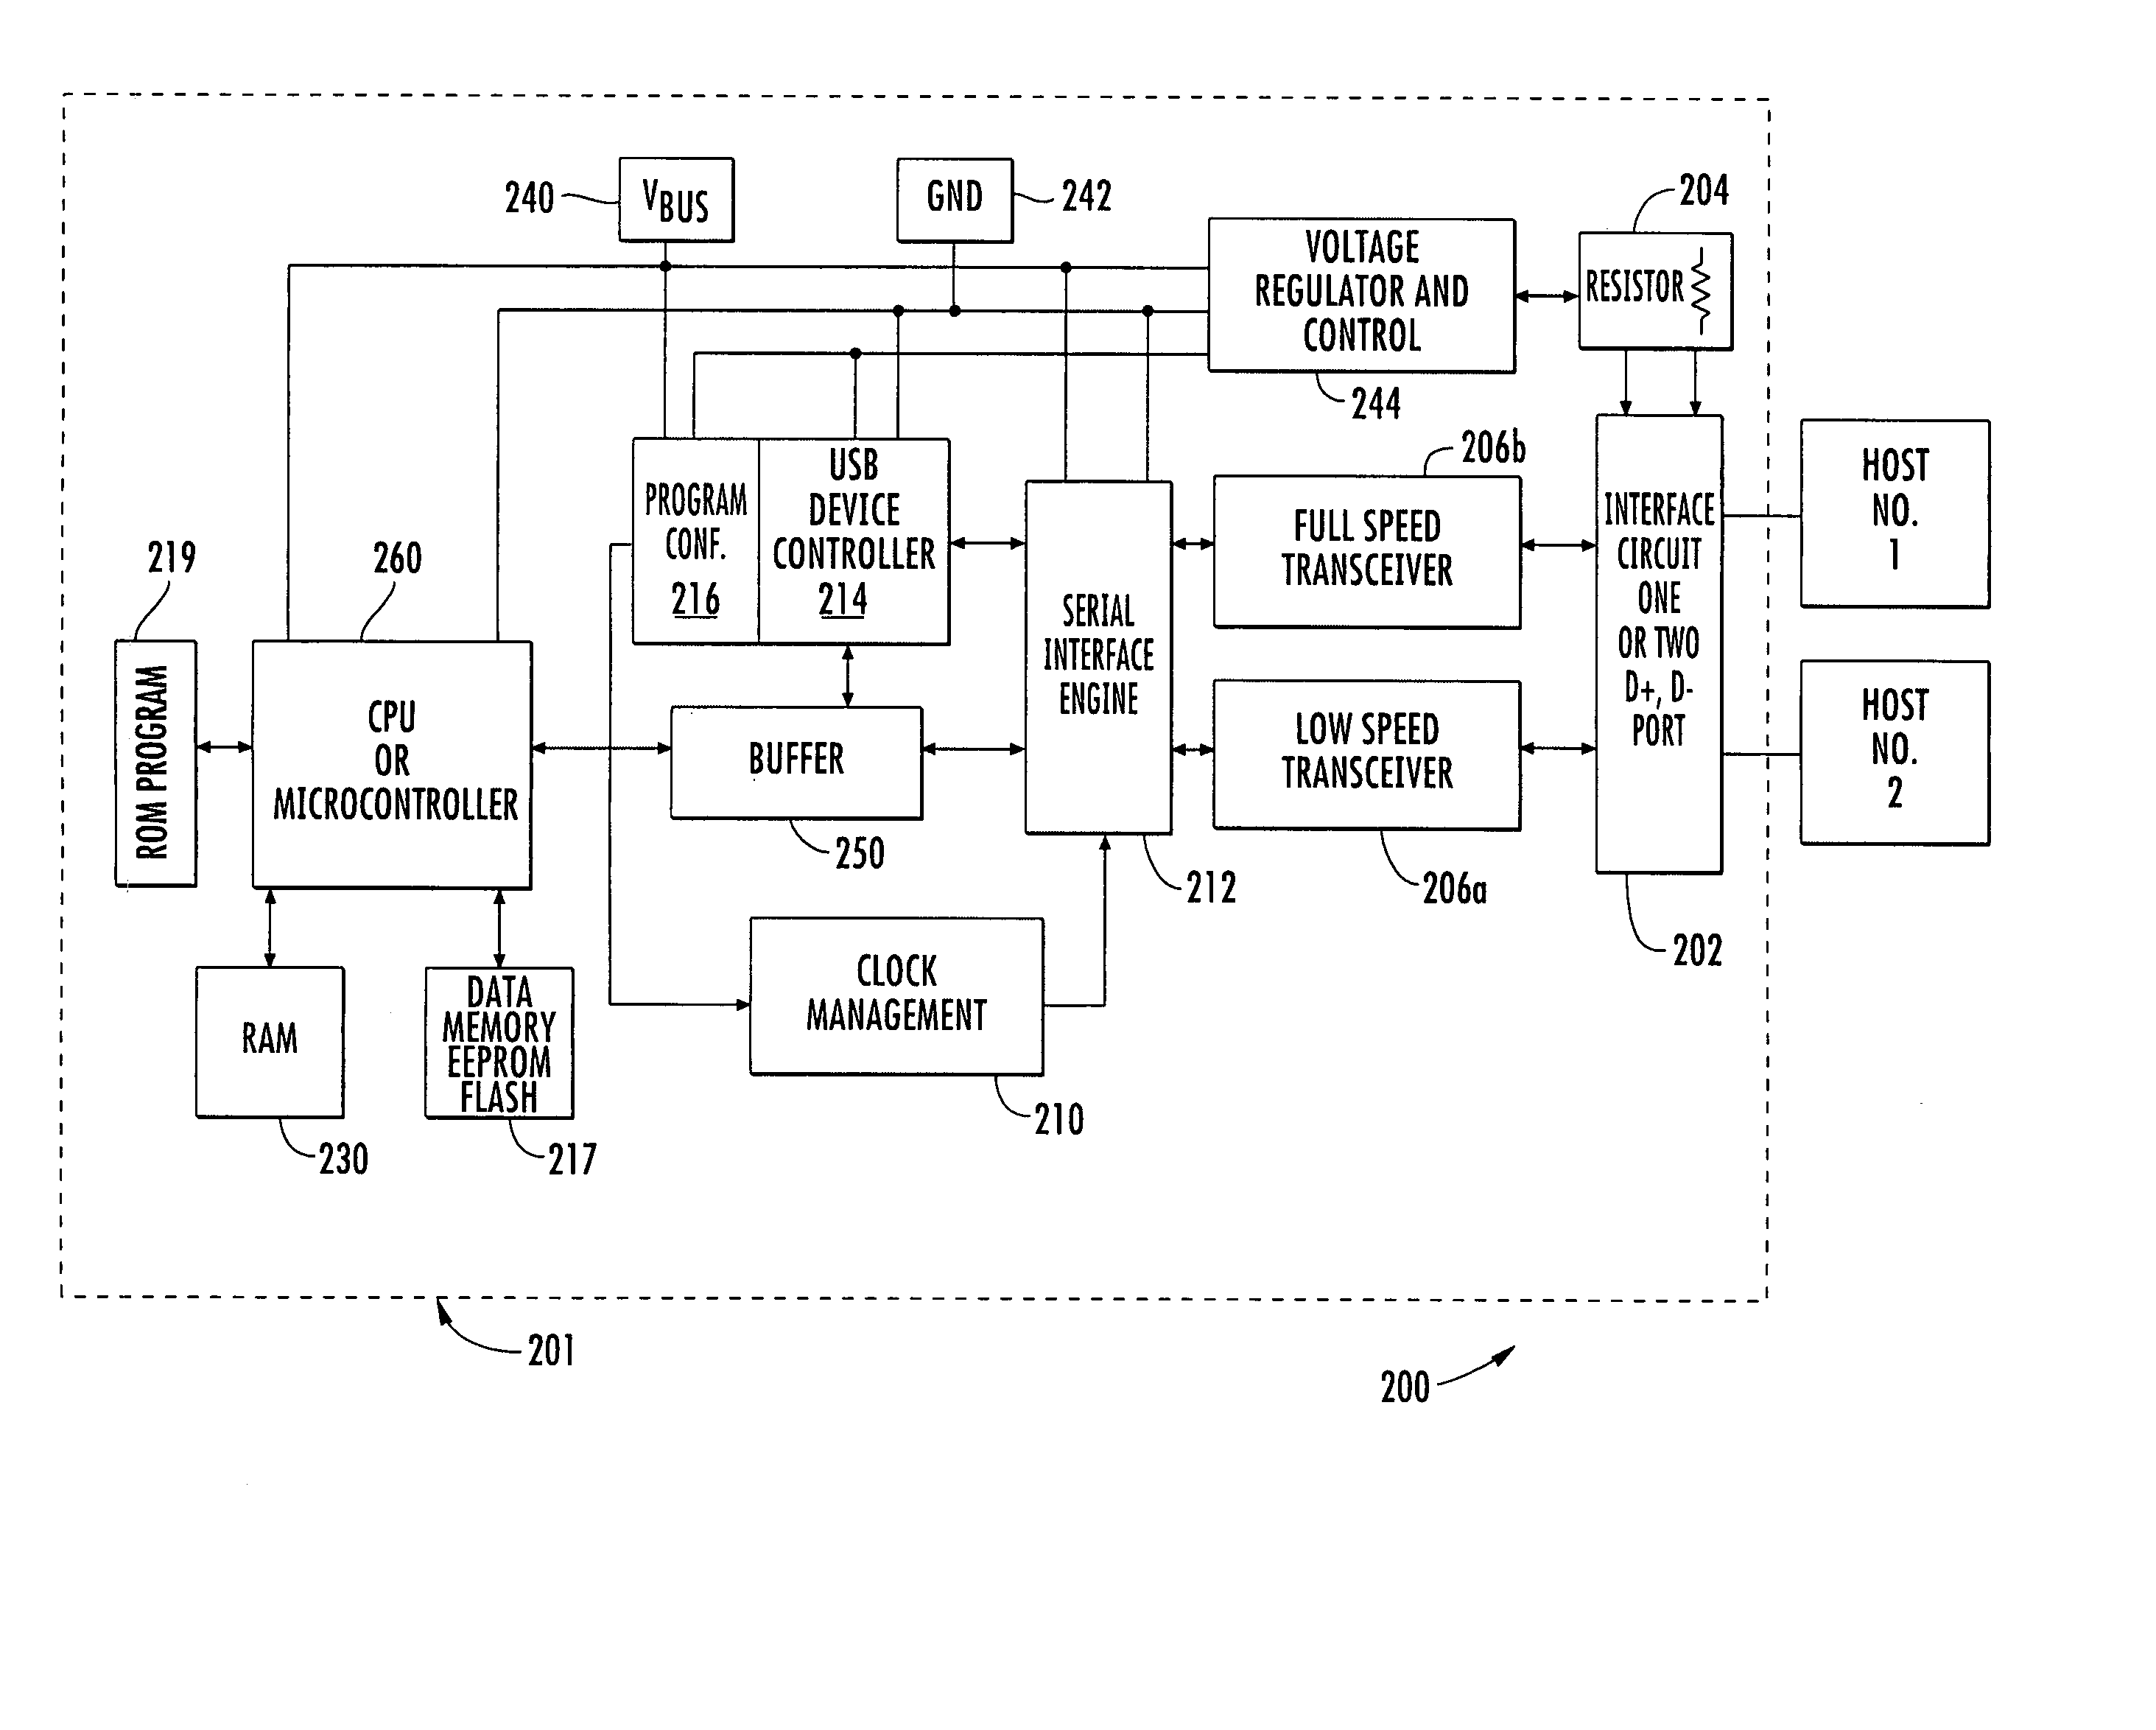 Generic universal serial bus device operable at low and full speed and adapted for use in a smart card device